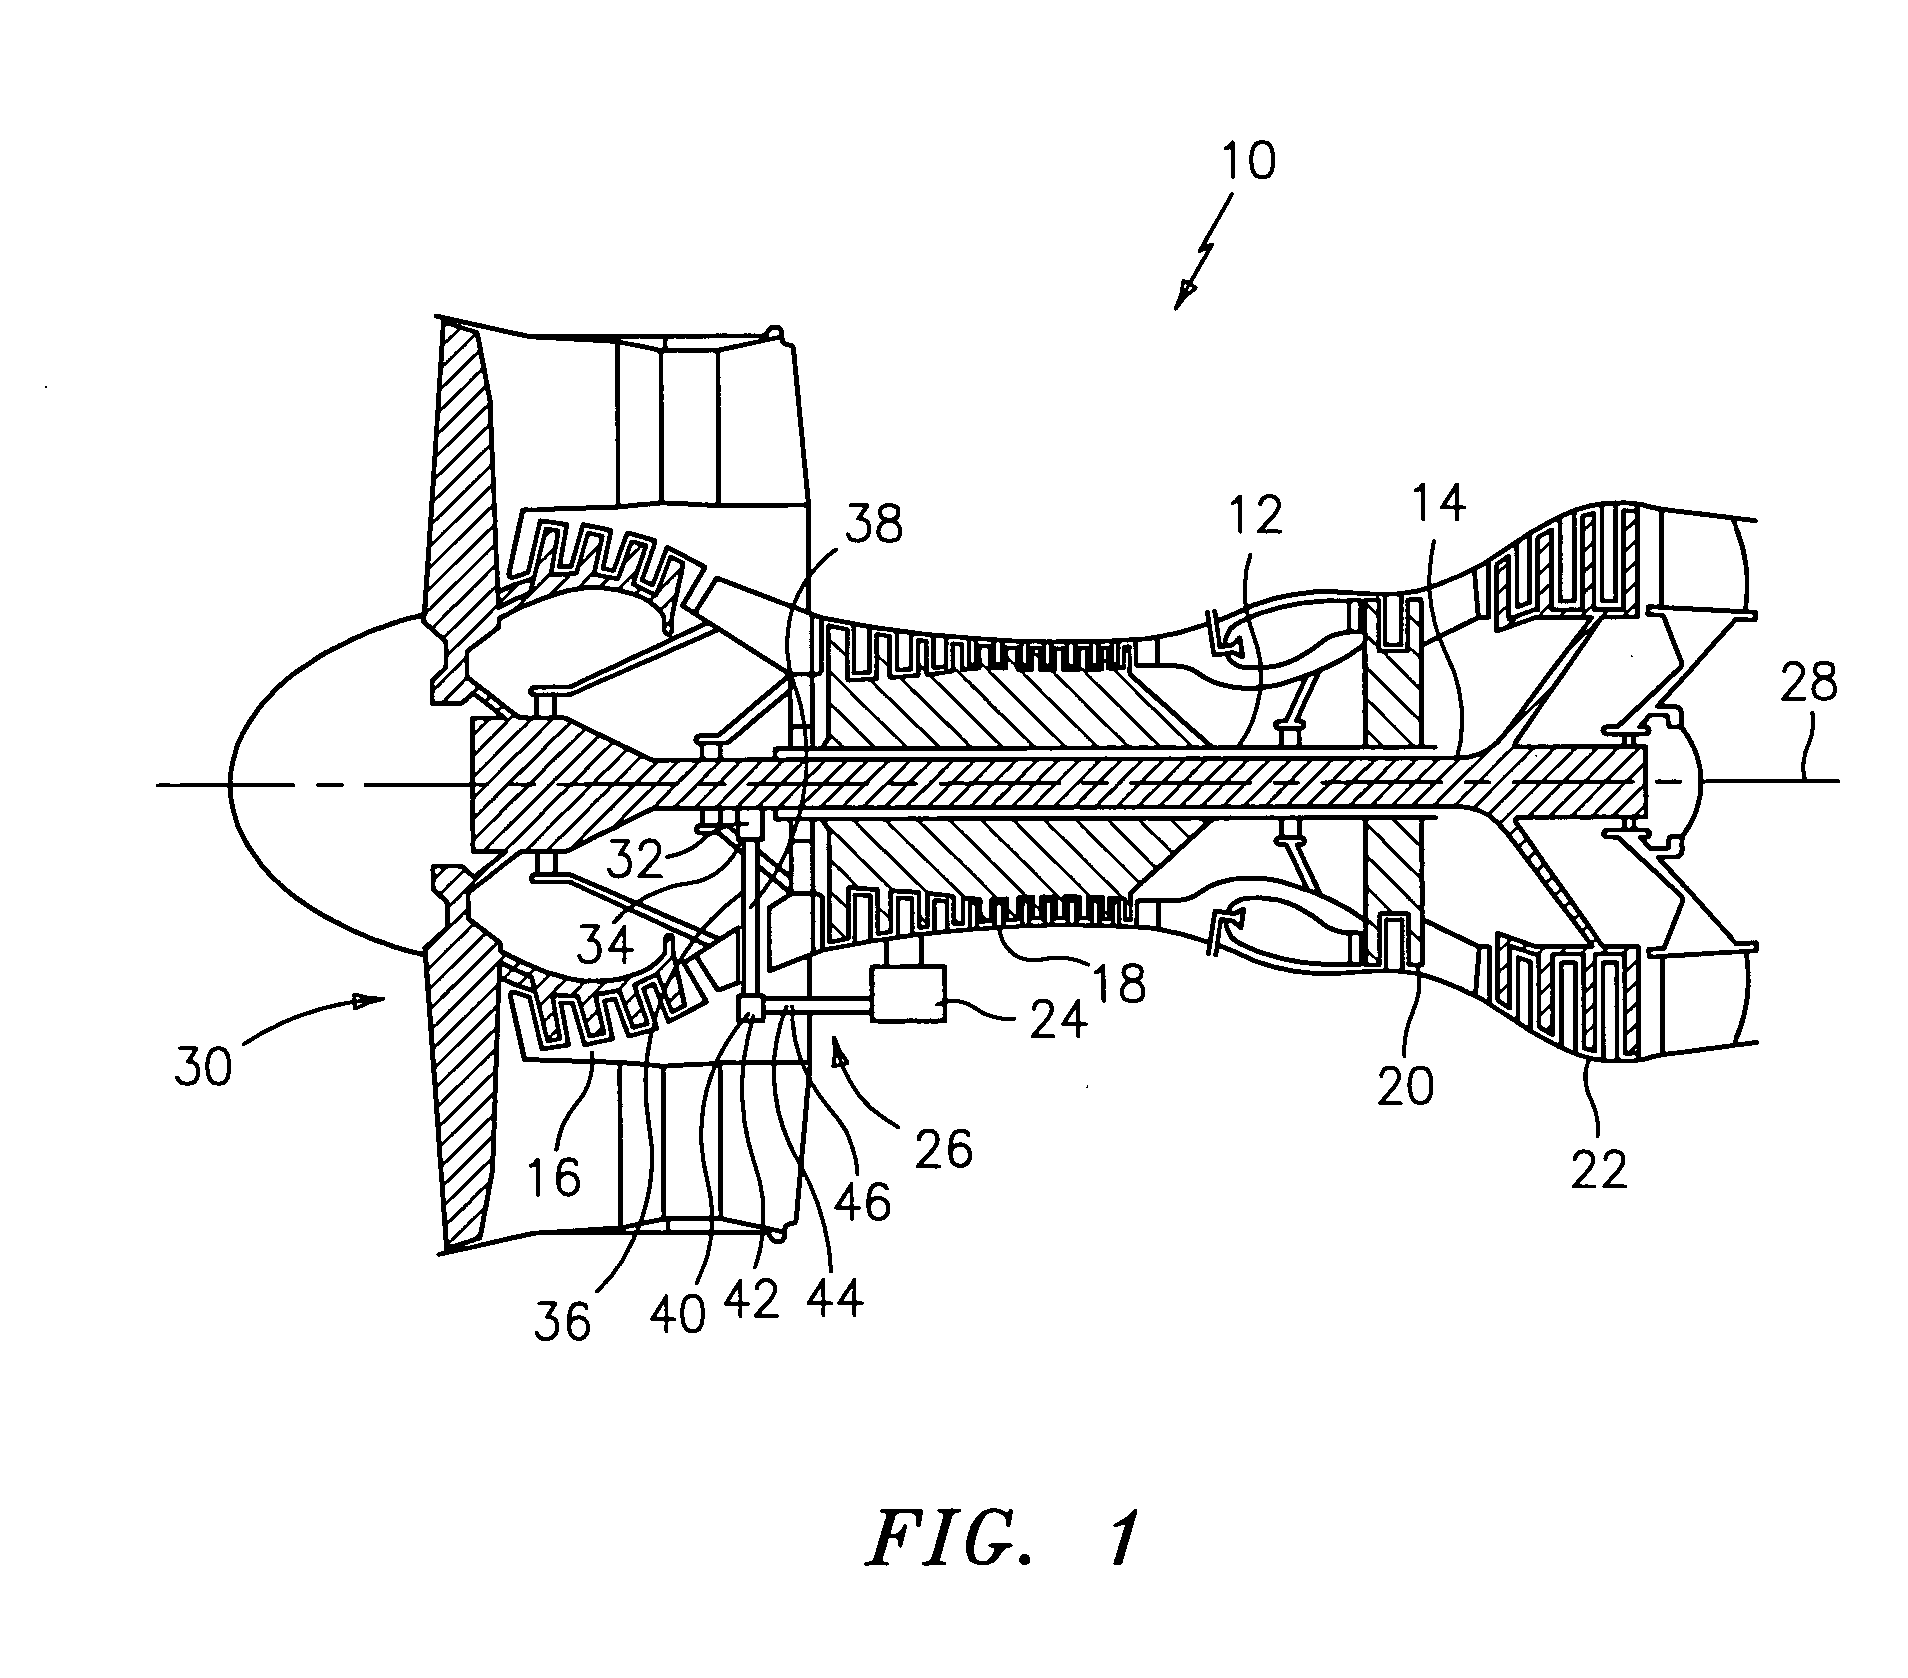 Apparatus for driving an accessory gearbox in a gas turbine engine